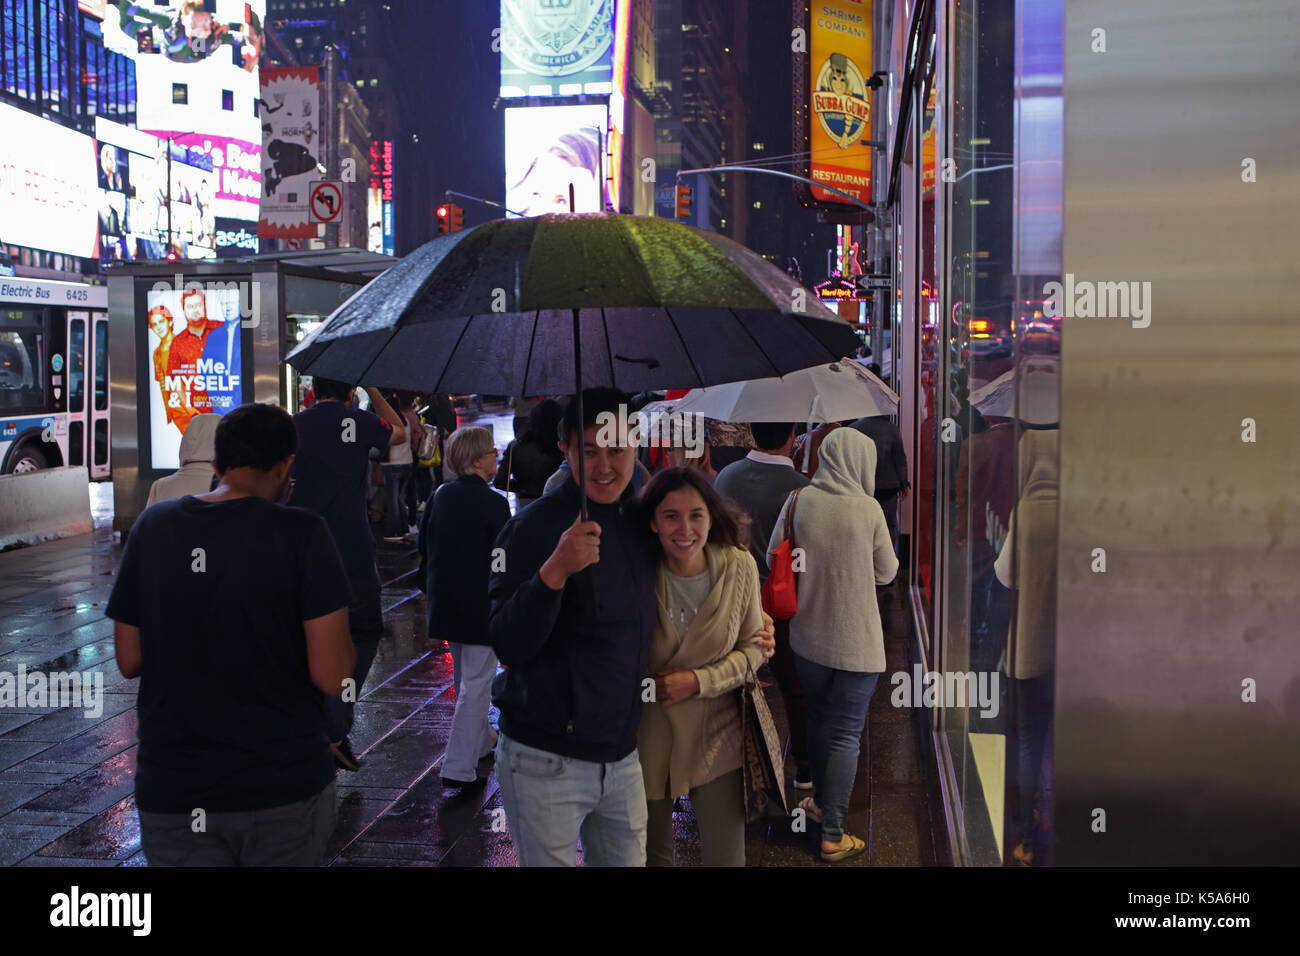 Rainy night in Times Square, tourists with umbrellas walk 7th Avenue and Broadway brightly lit by electric billboard advertising screens Stock Photo